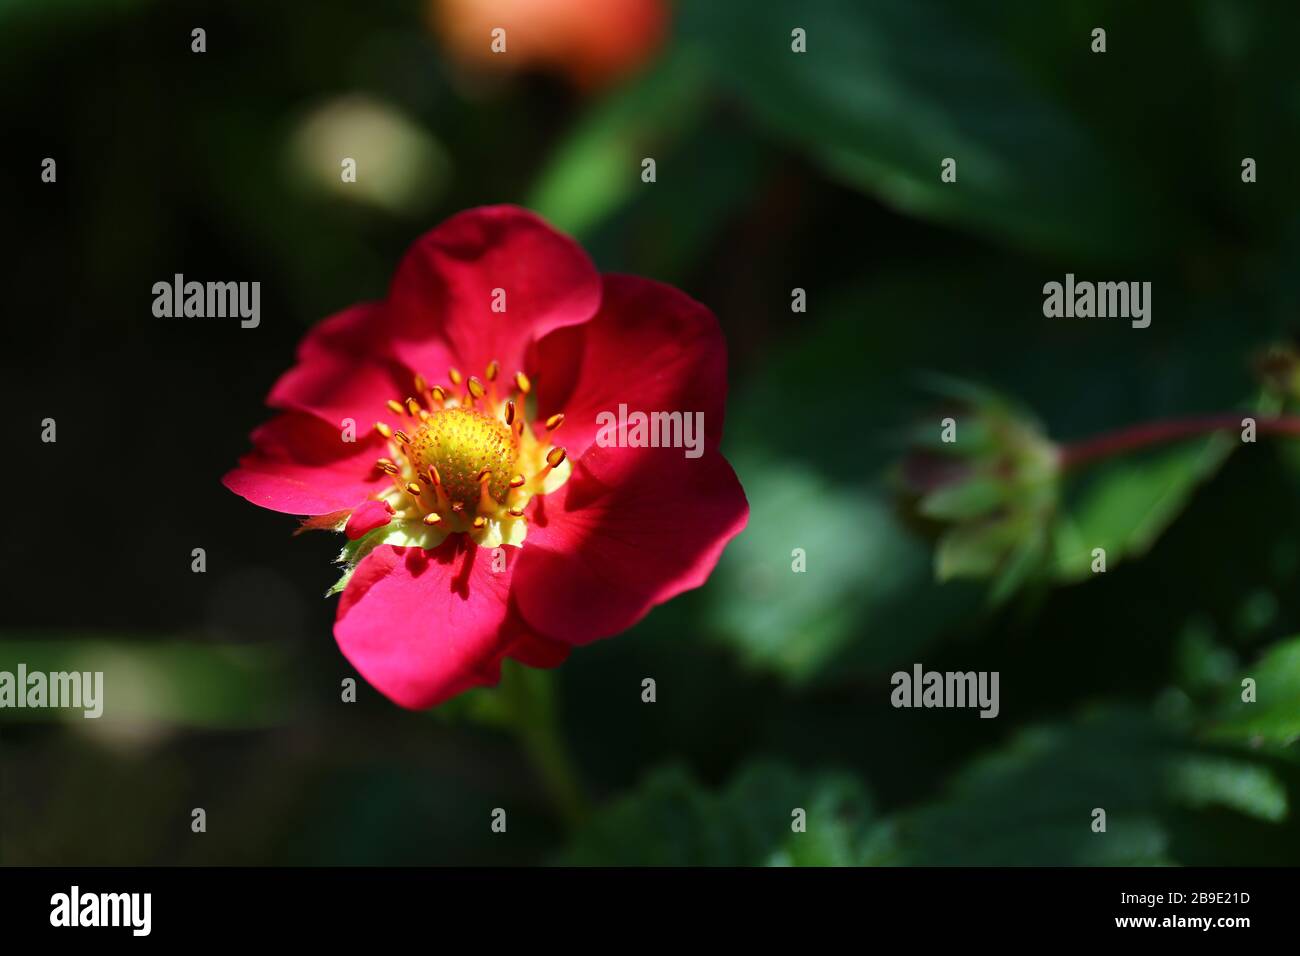 Red flower with green buds on blurred dark background Stock Photo